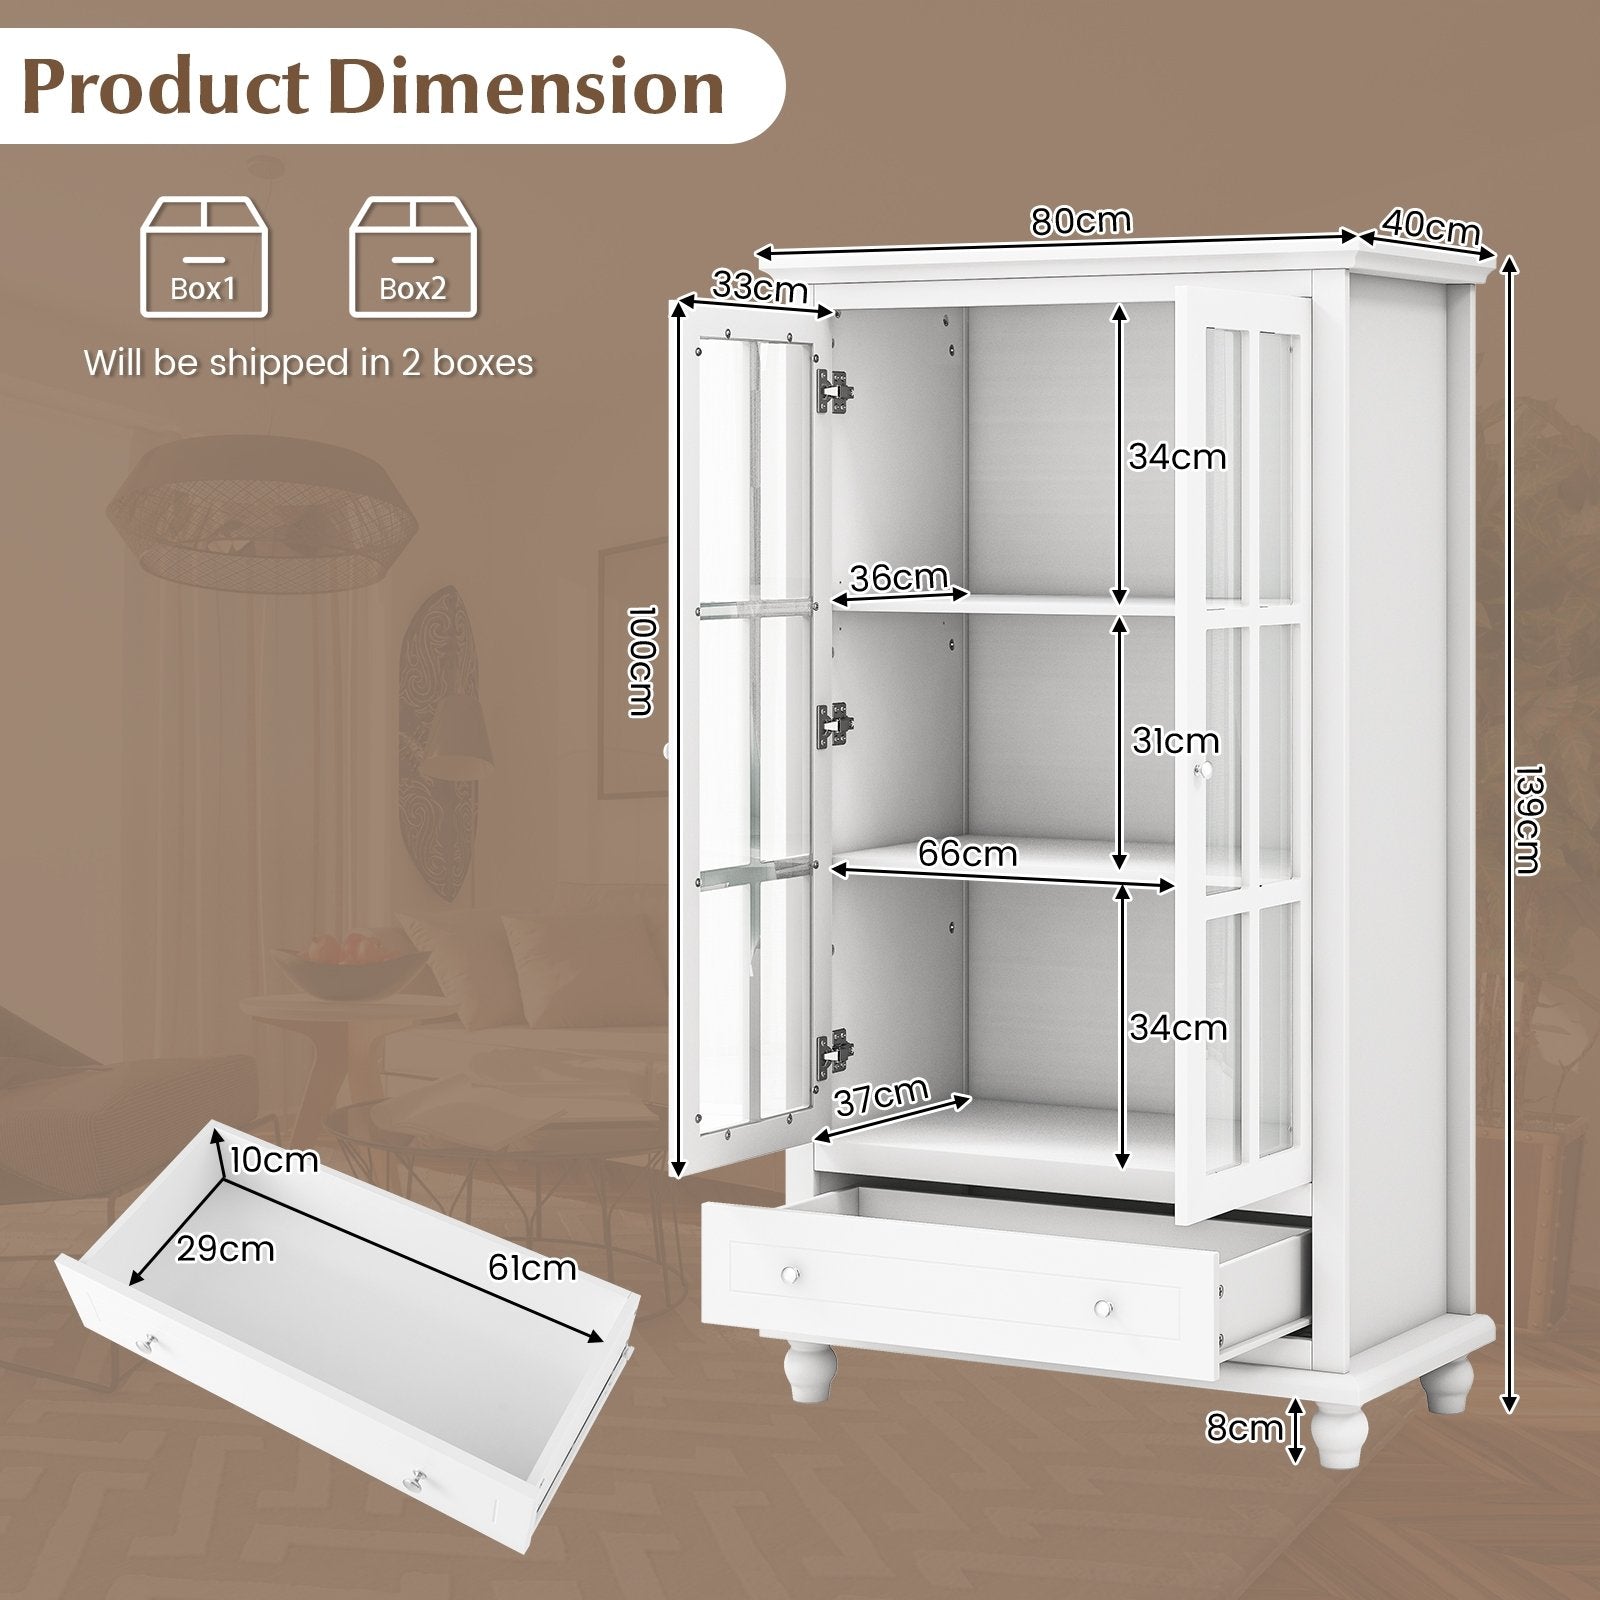 55 Inch Bookcase Cabinet with Tempered Glass Doors, White - Gallery Canada